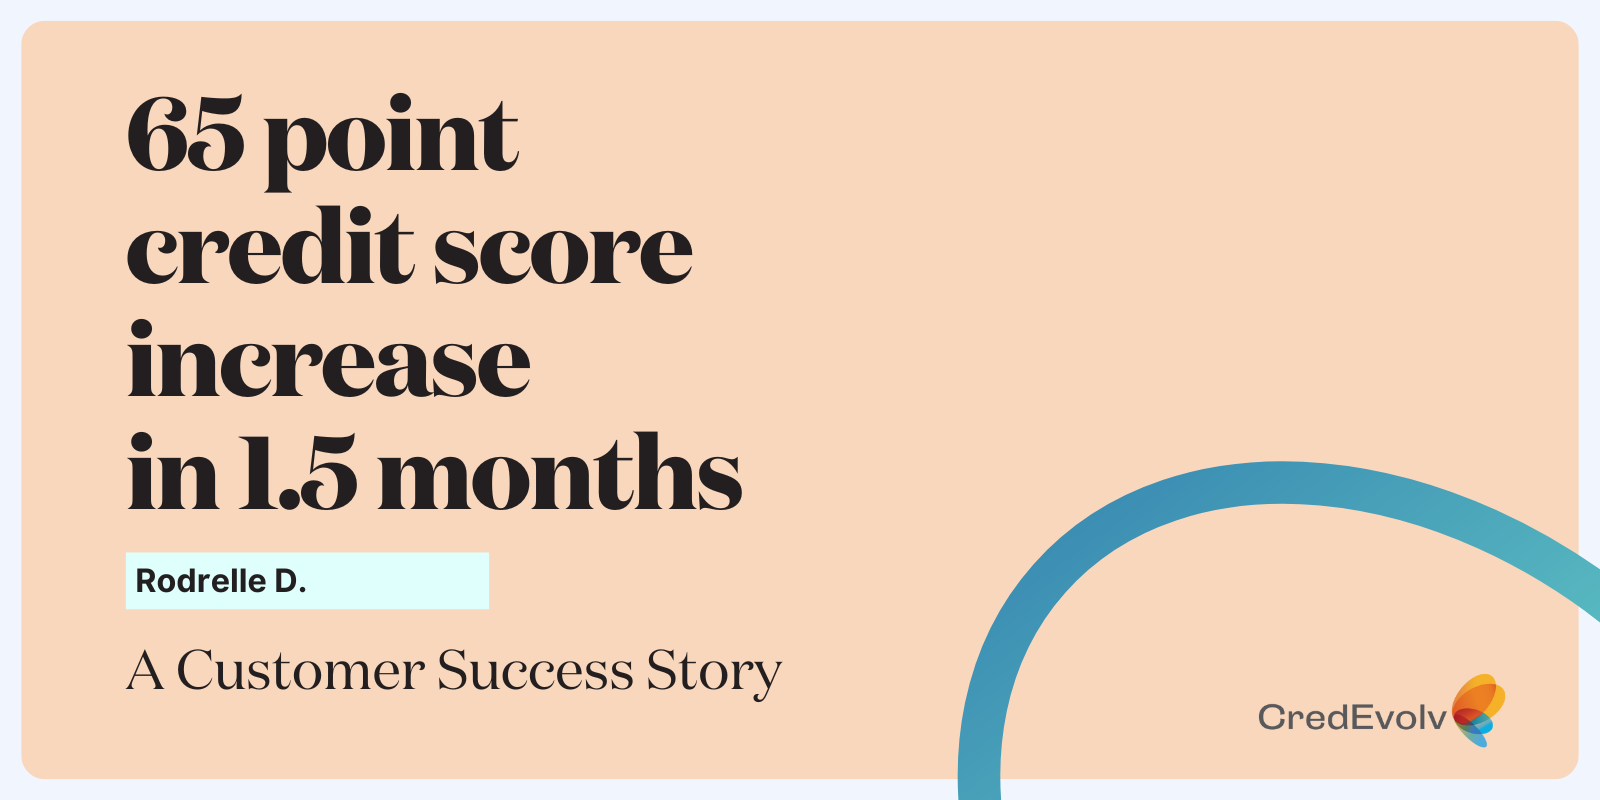 Credit Success Story - 65 point credit score increase in 1.5 months